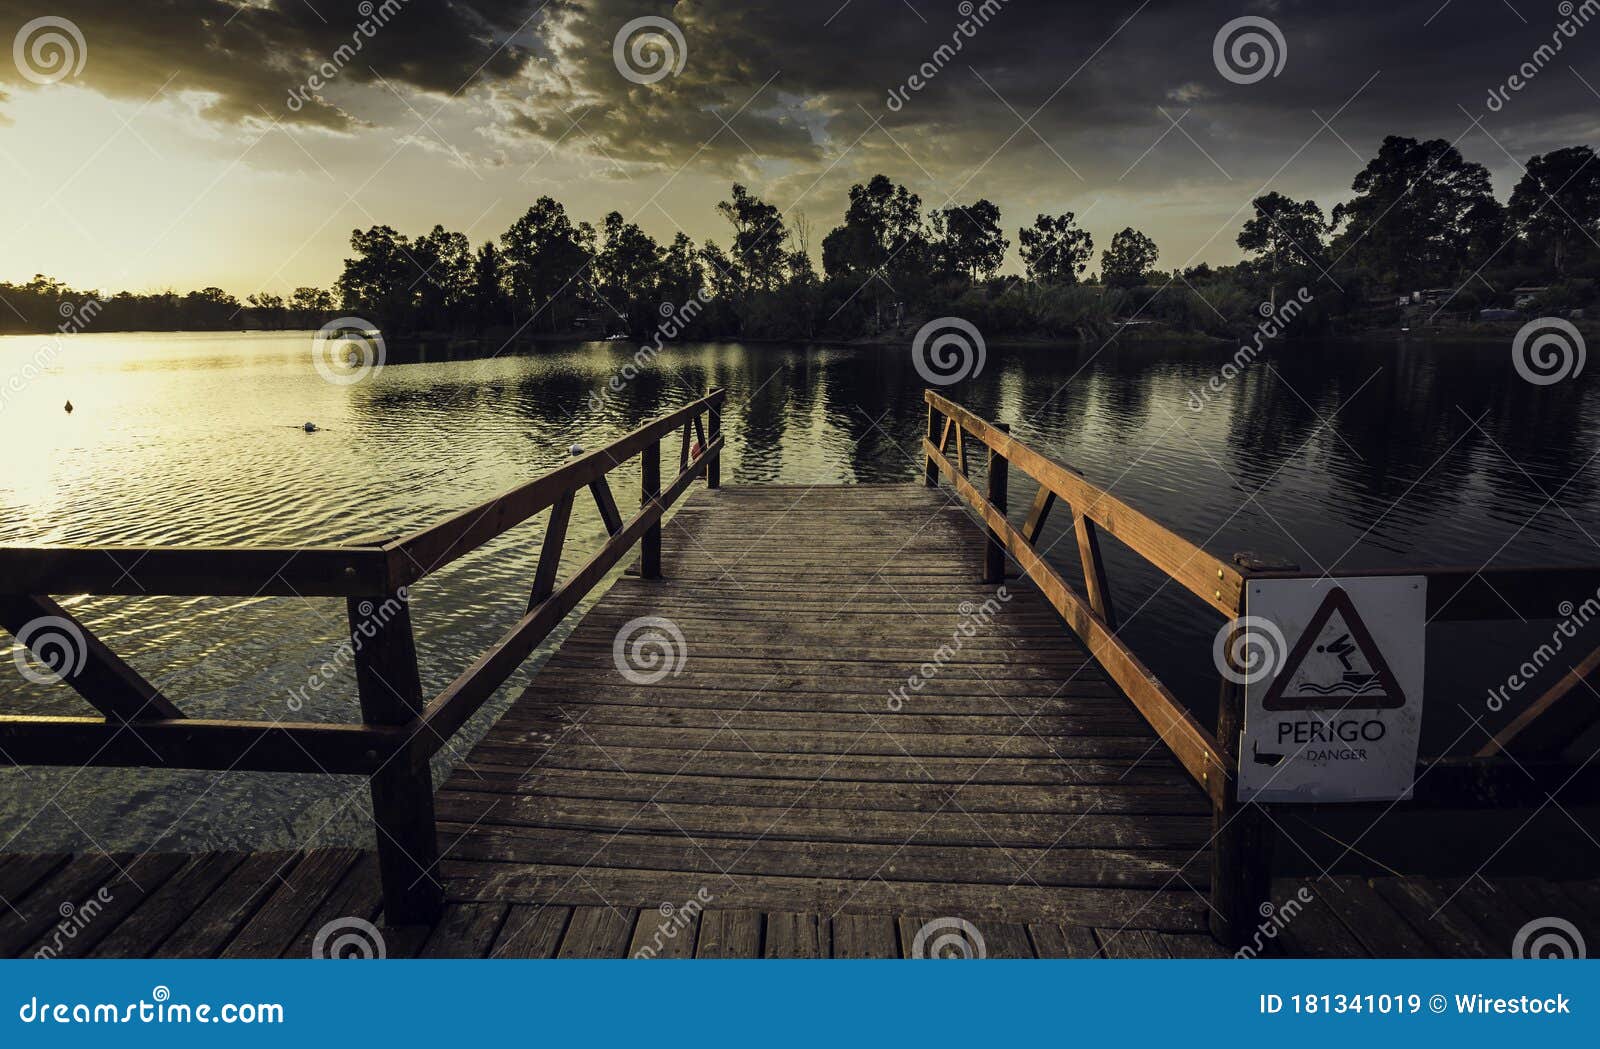 wooden dock with a [perigo - danger] sign on a river under a dark cloudy sky in the evening